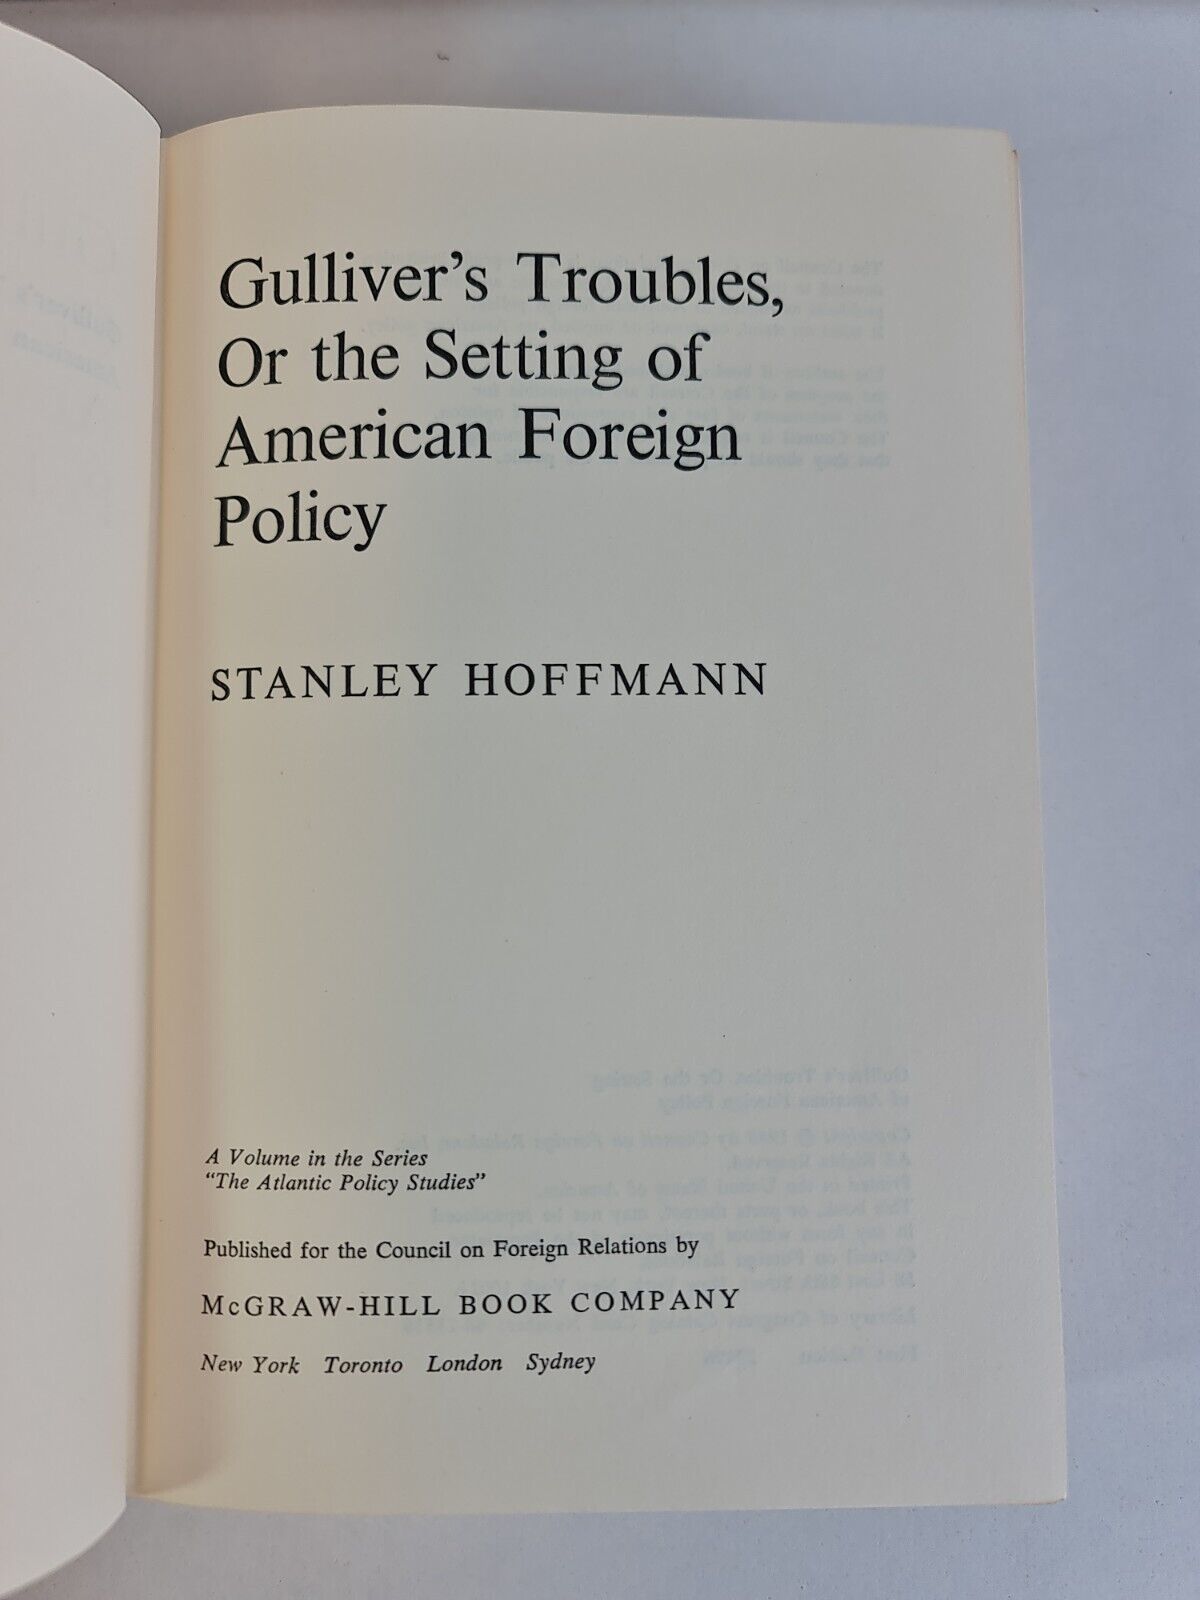 Gulliver's Troubles by Stanley Hoffmann (1968)